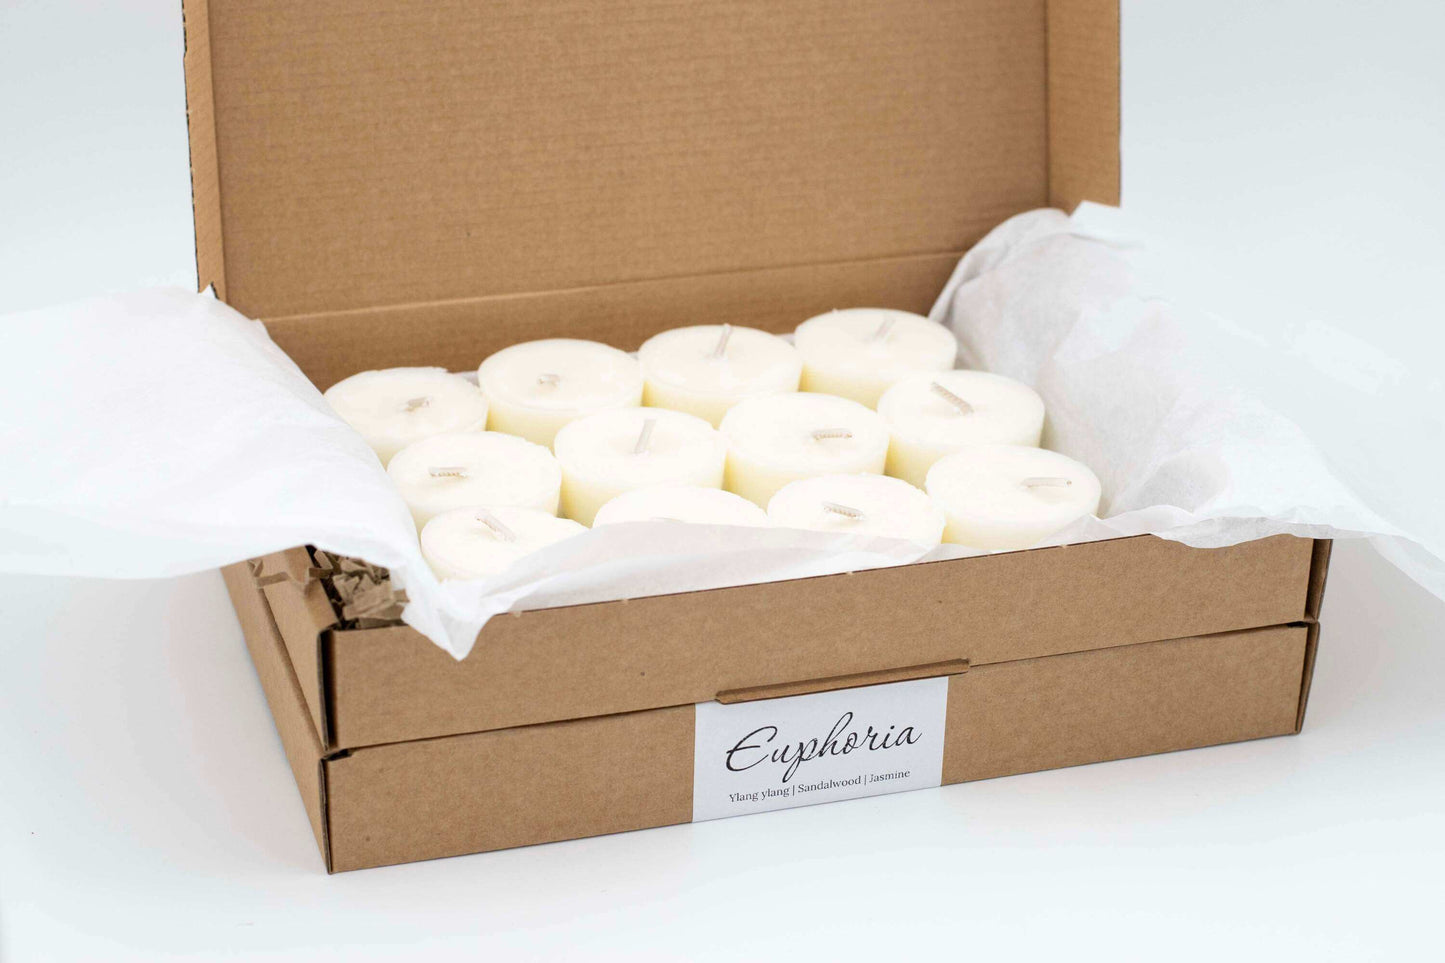 12-pack of Euphoria scented tea light candles with ylang-ylang, jasmine, and sandalwood, natural and refillable, packaged in an eco-friendly cardboard box.